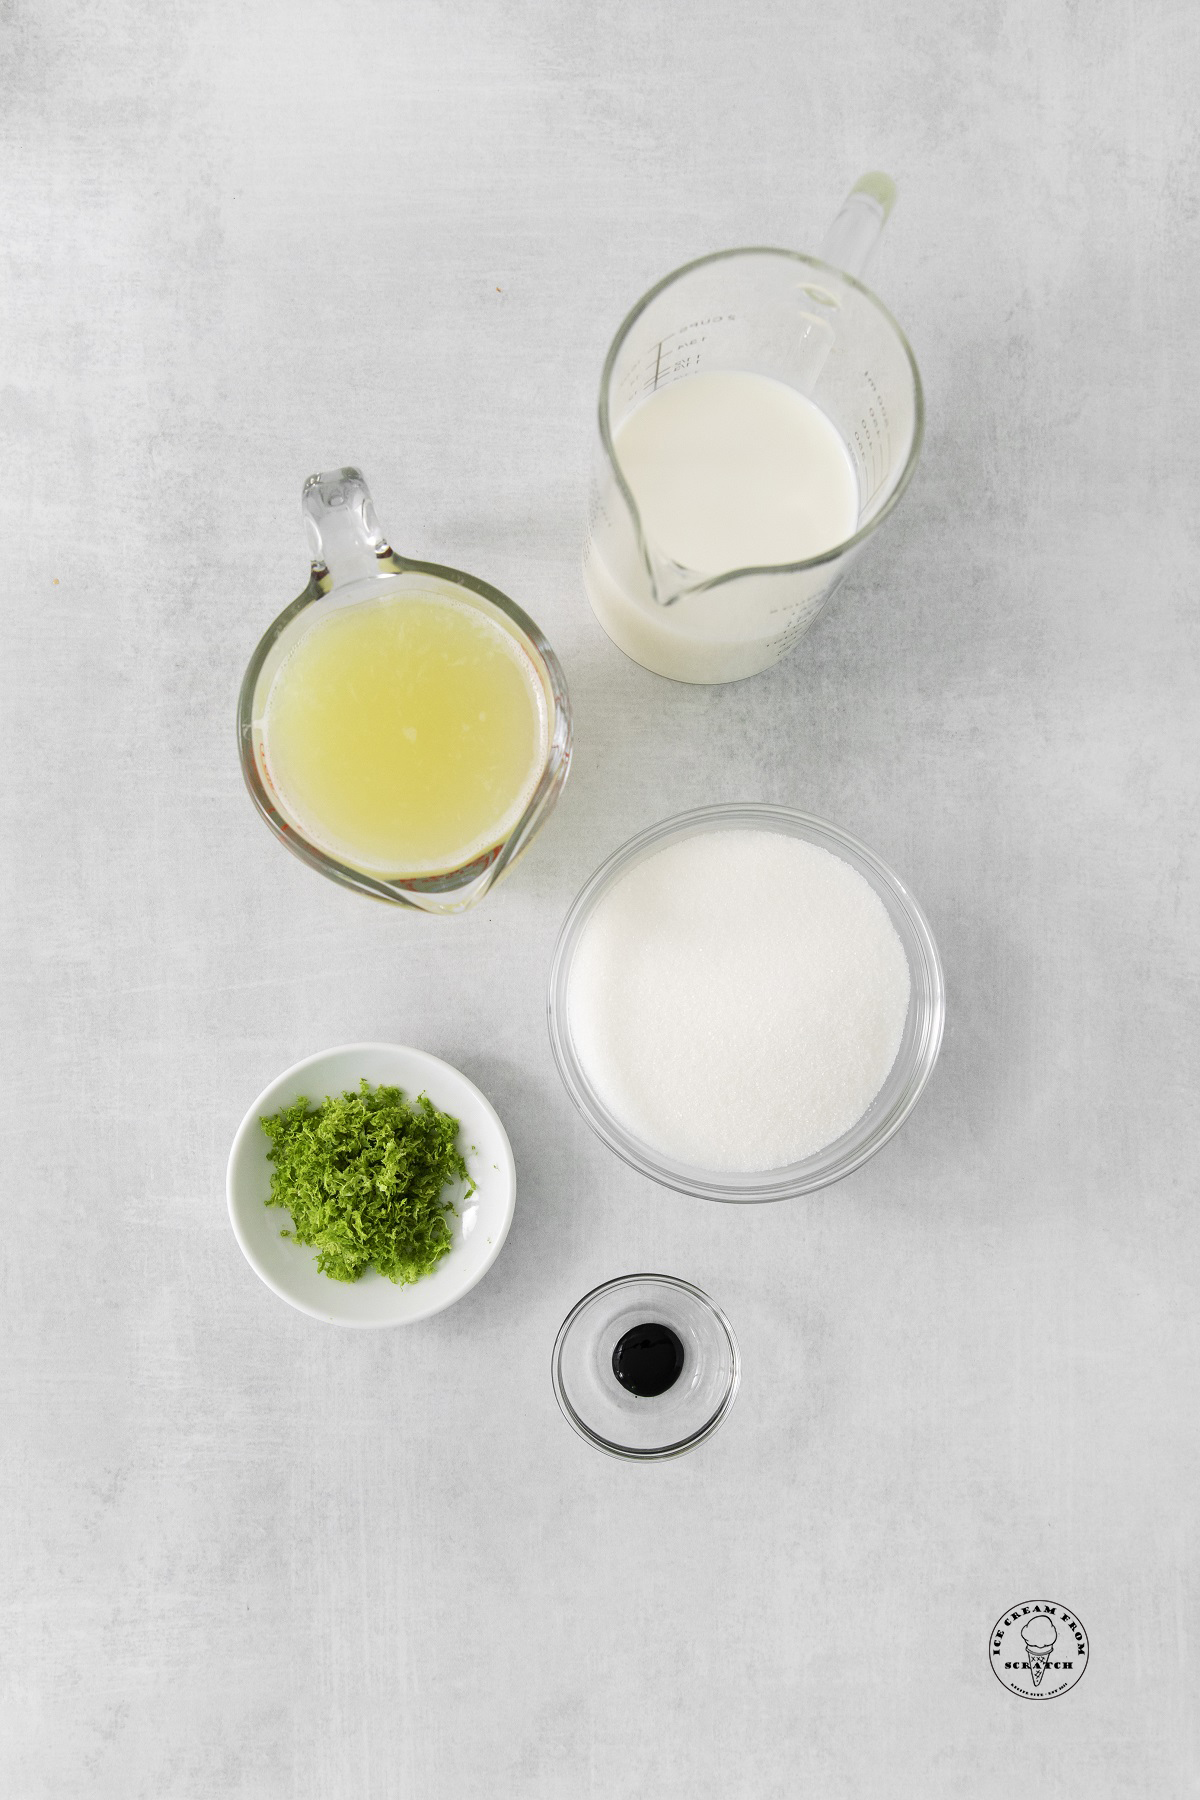 The ingredients for lime sherbet, including lime juice, sugar, and lime zest, all in separate measuring bowls, viewed from overhead.